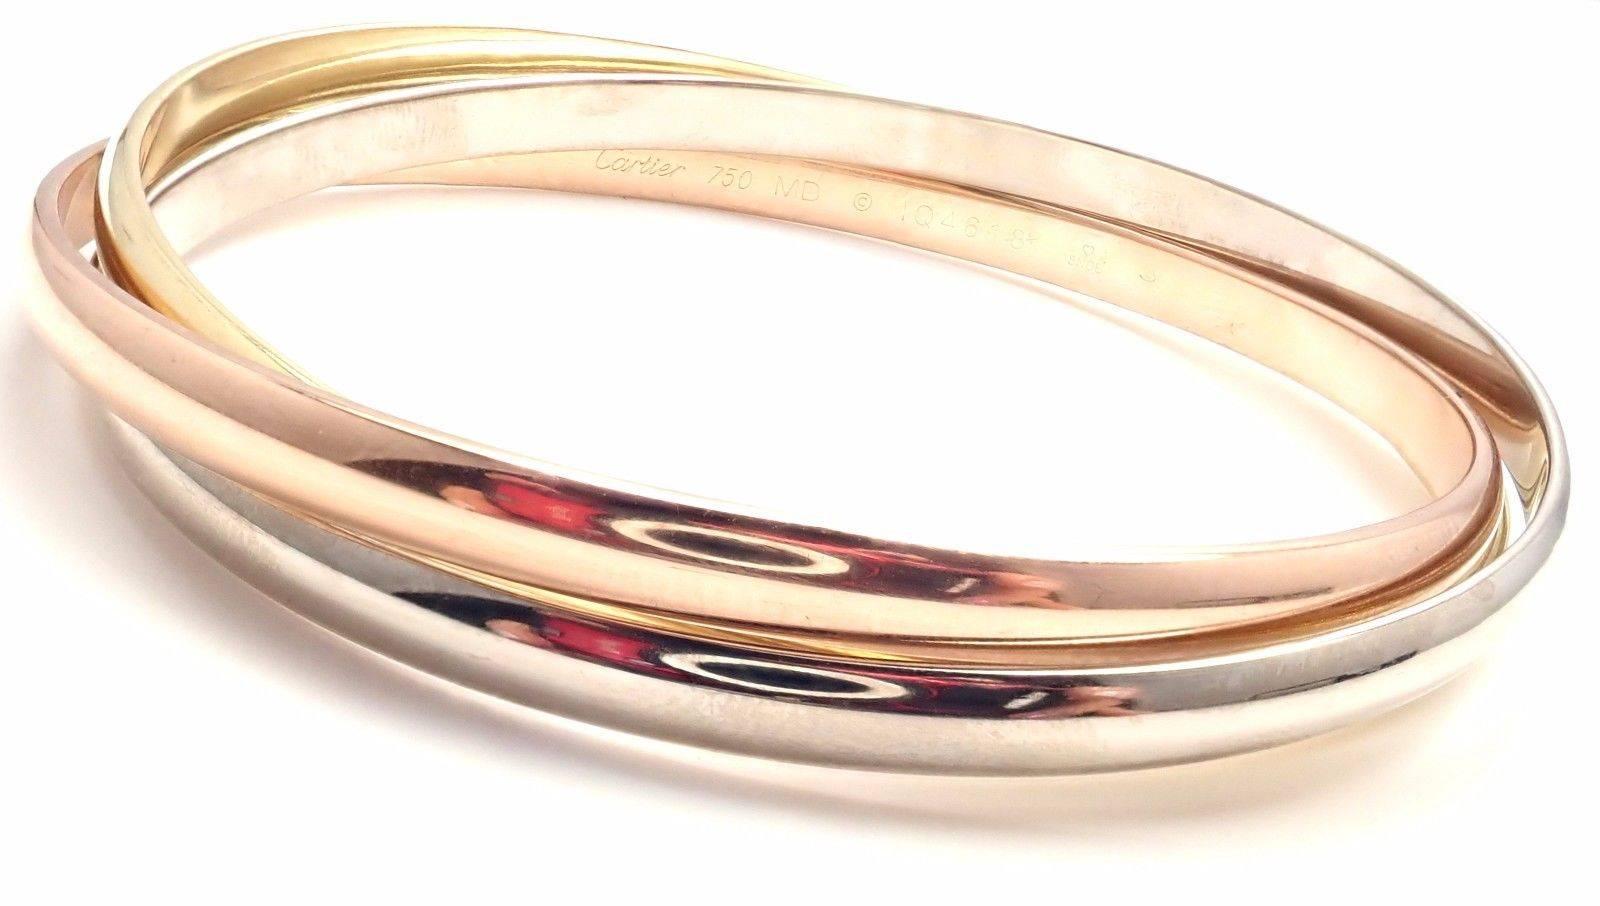 18k Tri-Colored Gold (Yellow, White, Rose) Trinity Rolling Bangle Bracelet by Cartier. 
This is a medium sized bangle. 
Details: 
Length: 7